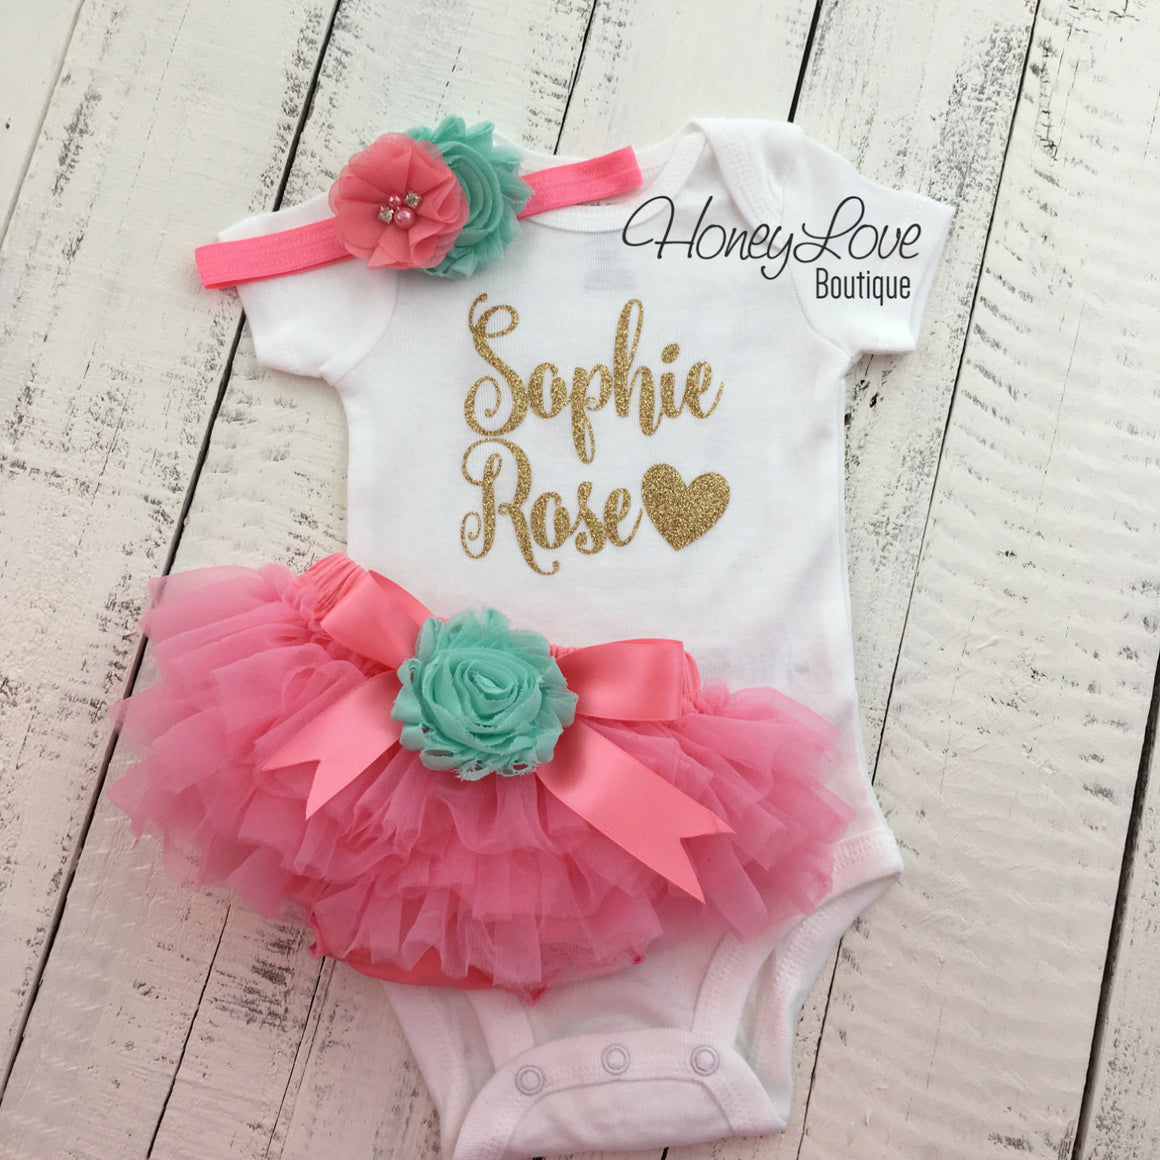 PERSONALIZED Name Outfit - Coral Pink and Gold Glitter - Mint/Aqua flower embellished tutu skirt bloomers - HoneyLoveBoutique